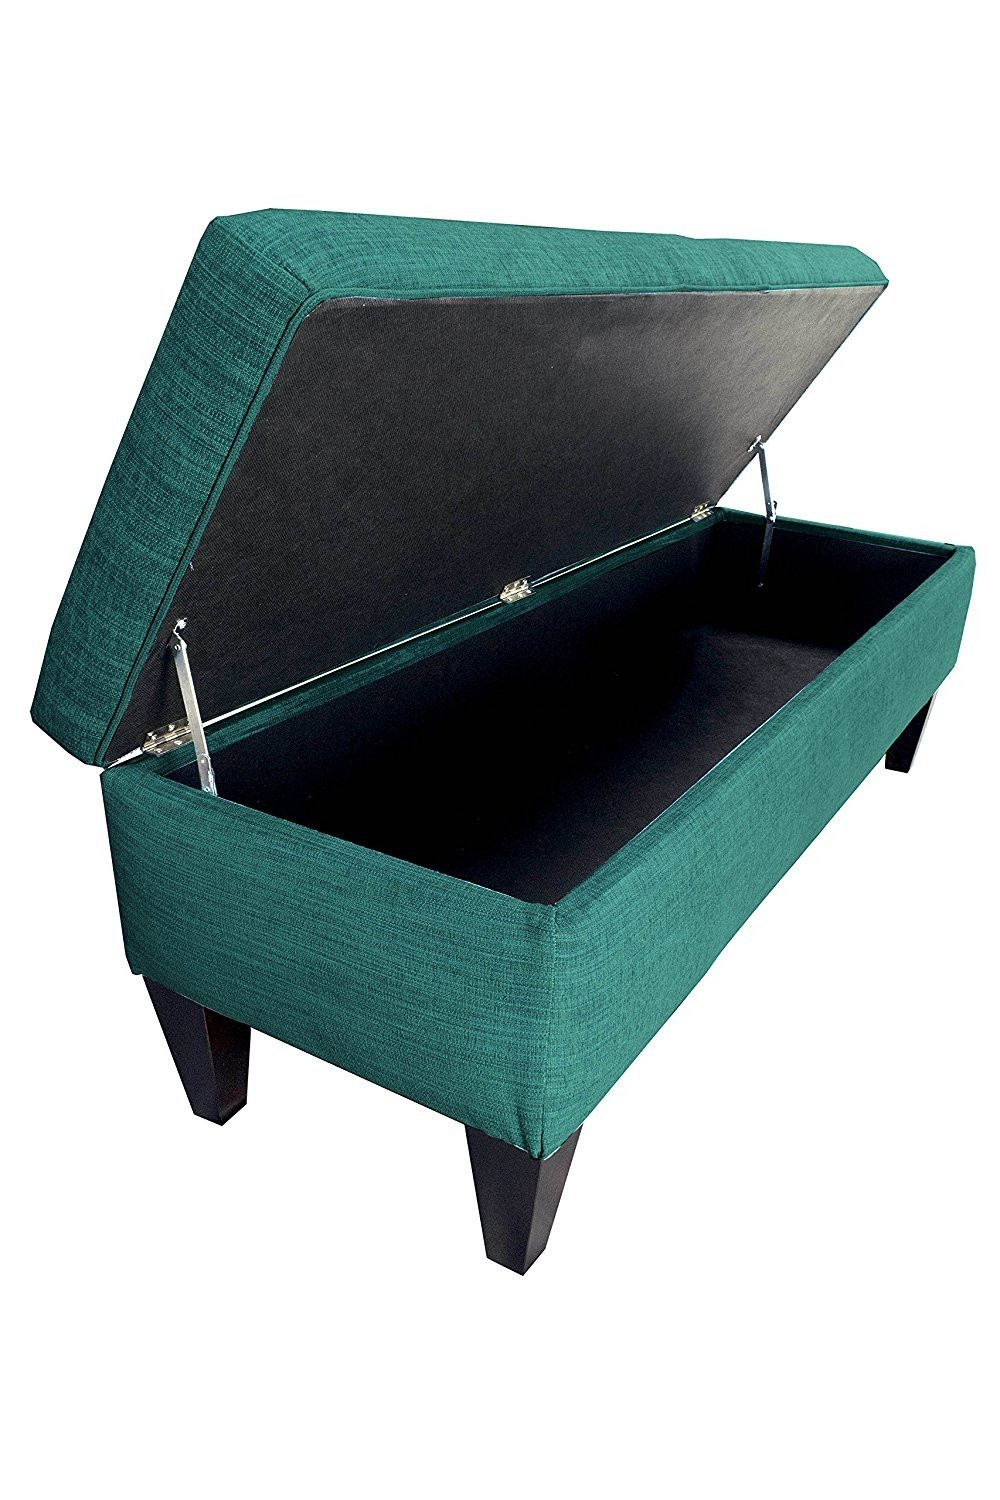 Turquoise Bench With Storage
 MJL Furniture Designs Brooke Collection Diamond Tufted